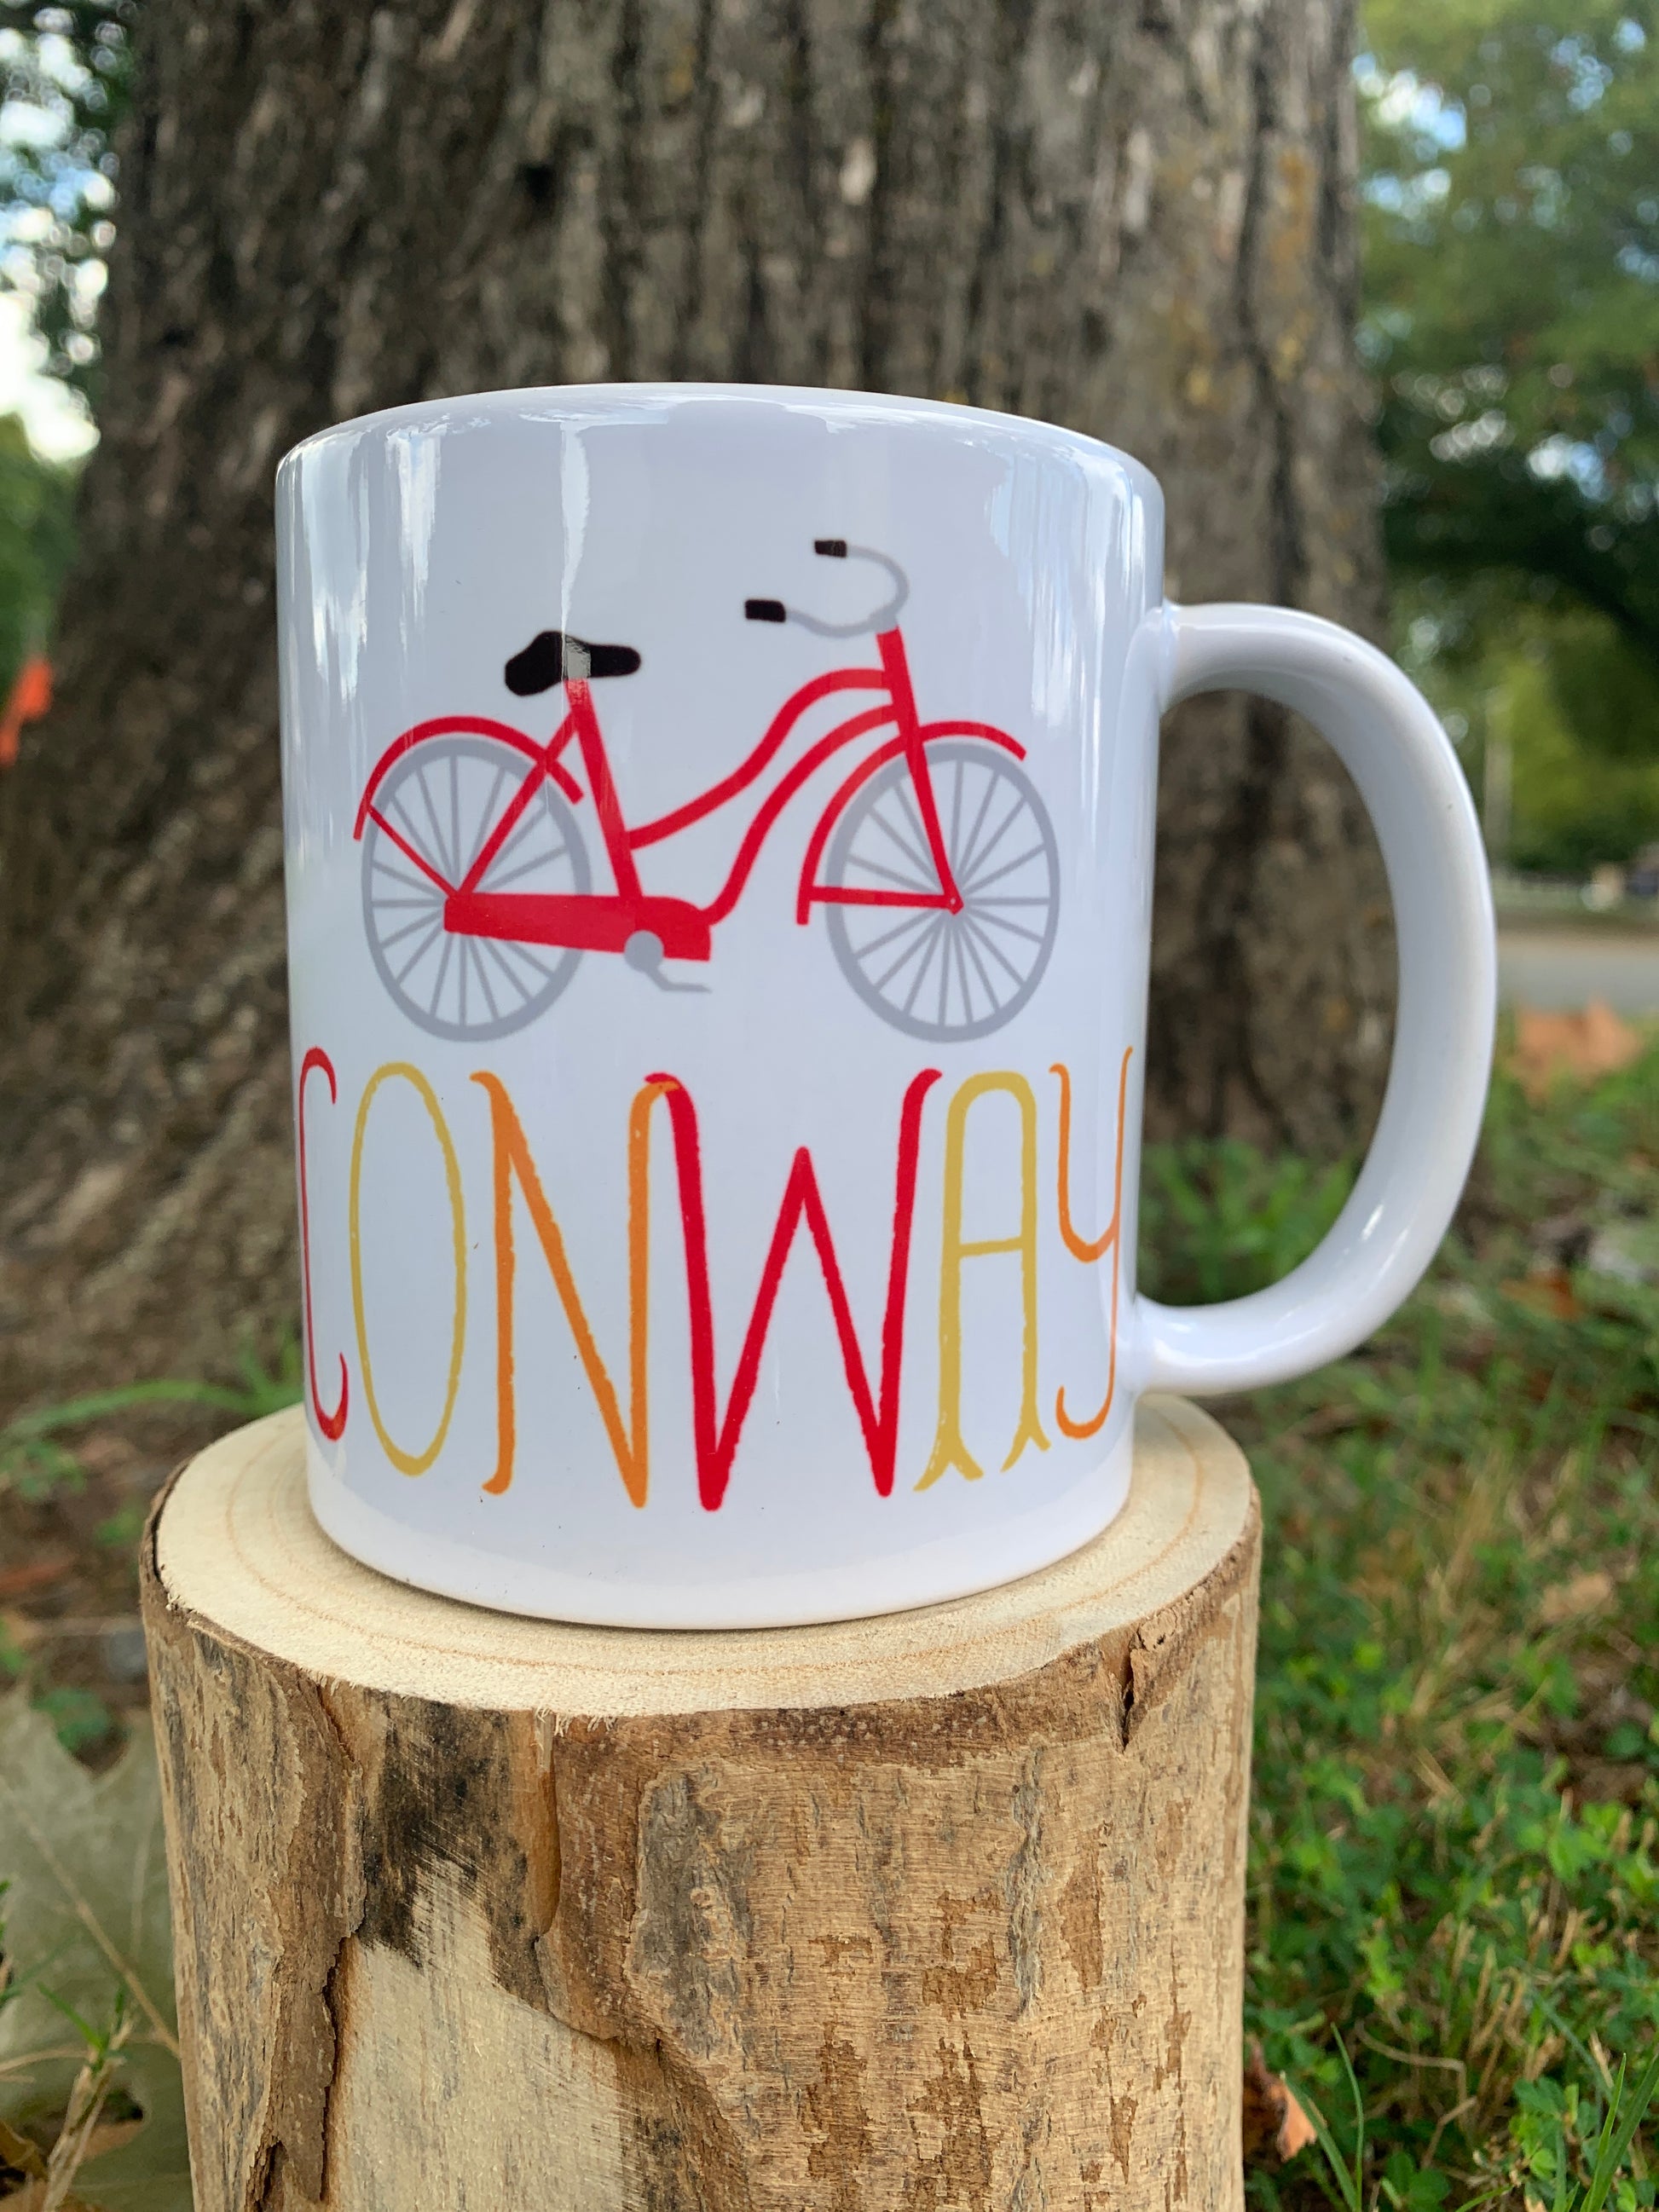 white ceramic mug with red bike graphic and "conway" text.